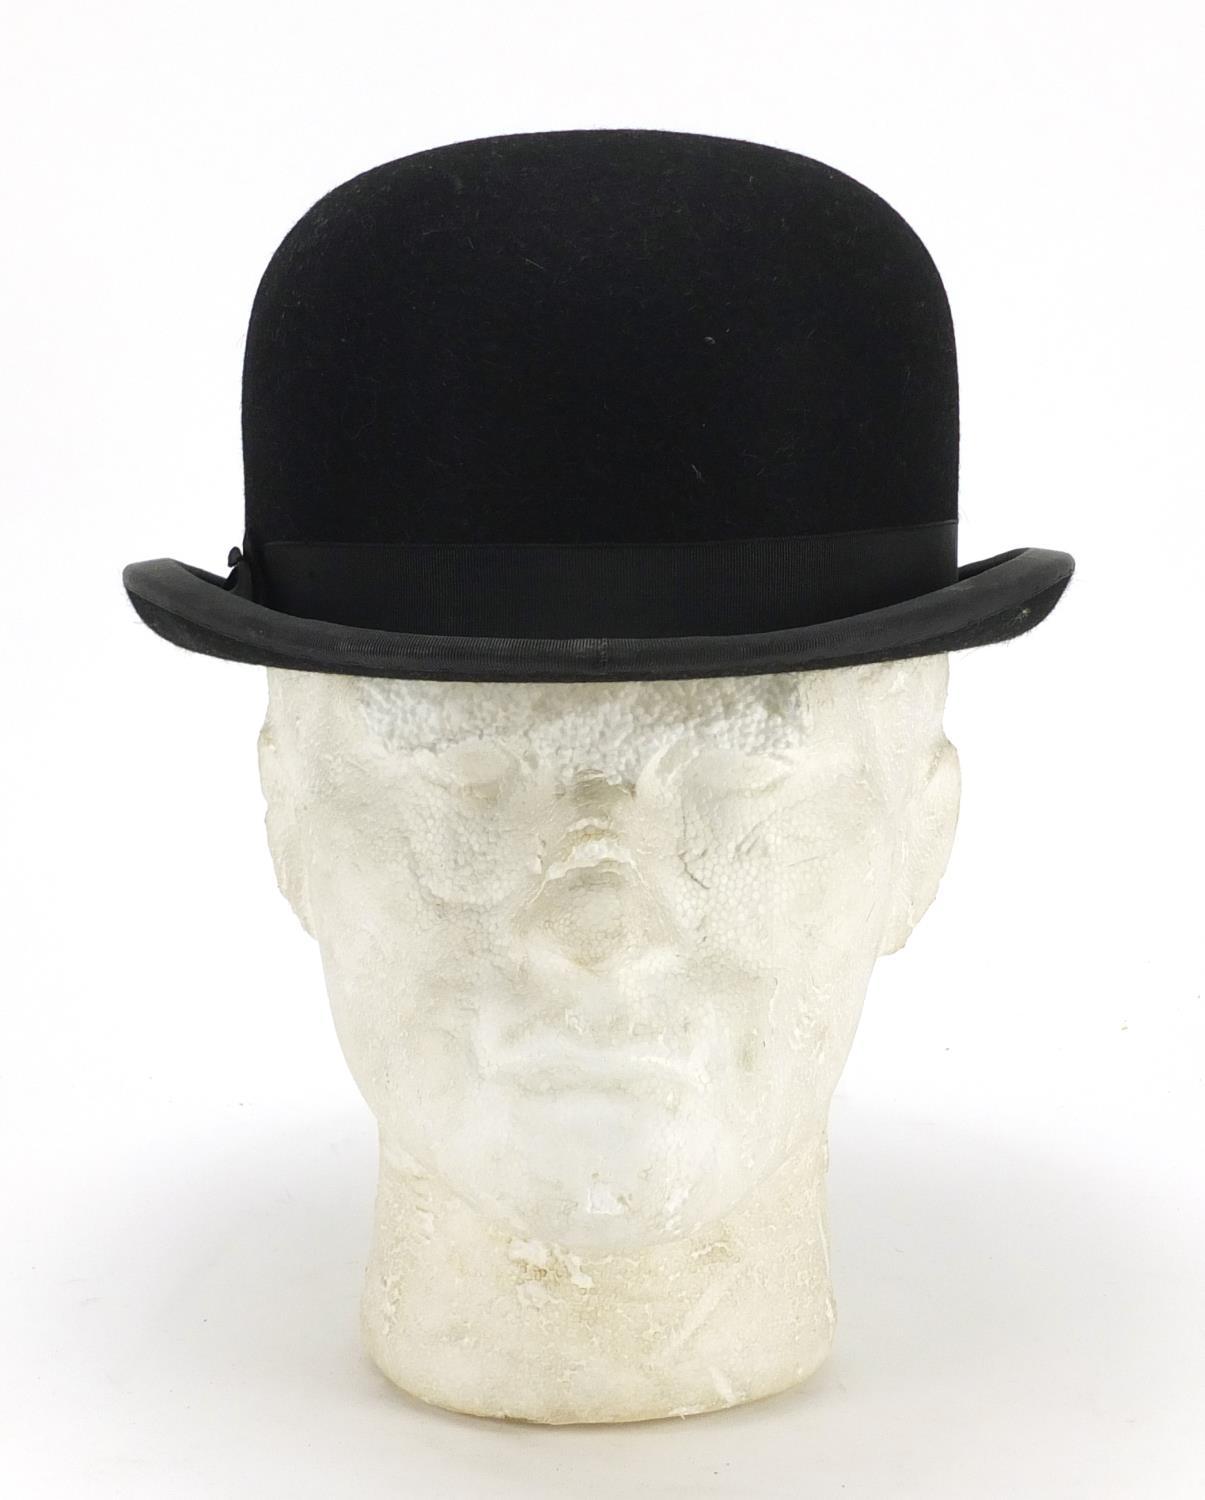 Gentleman's bowler hat retailed by Lock and Co, London, with box, the interior measurements, 21cm - Image 2 of 8